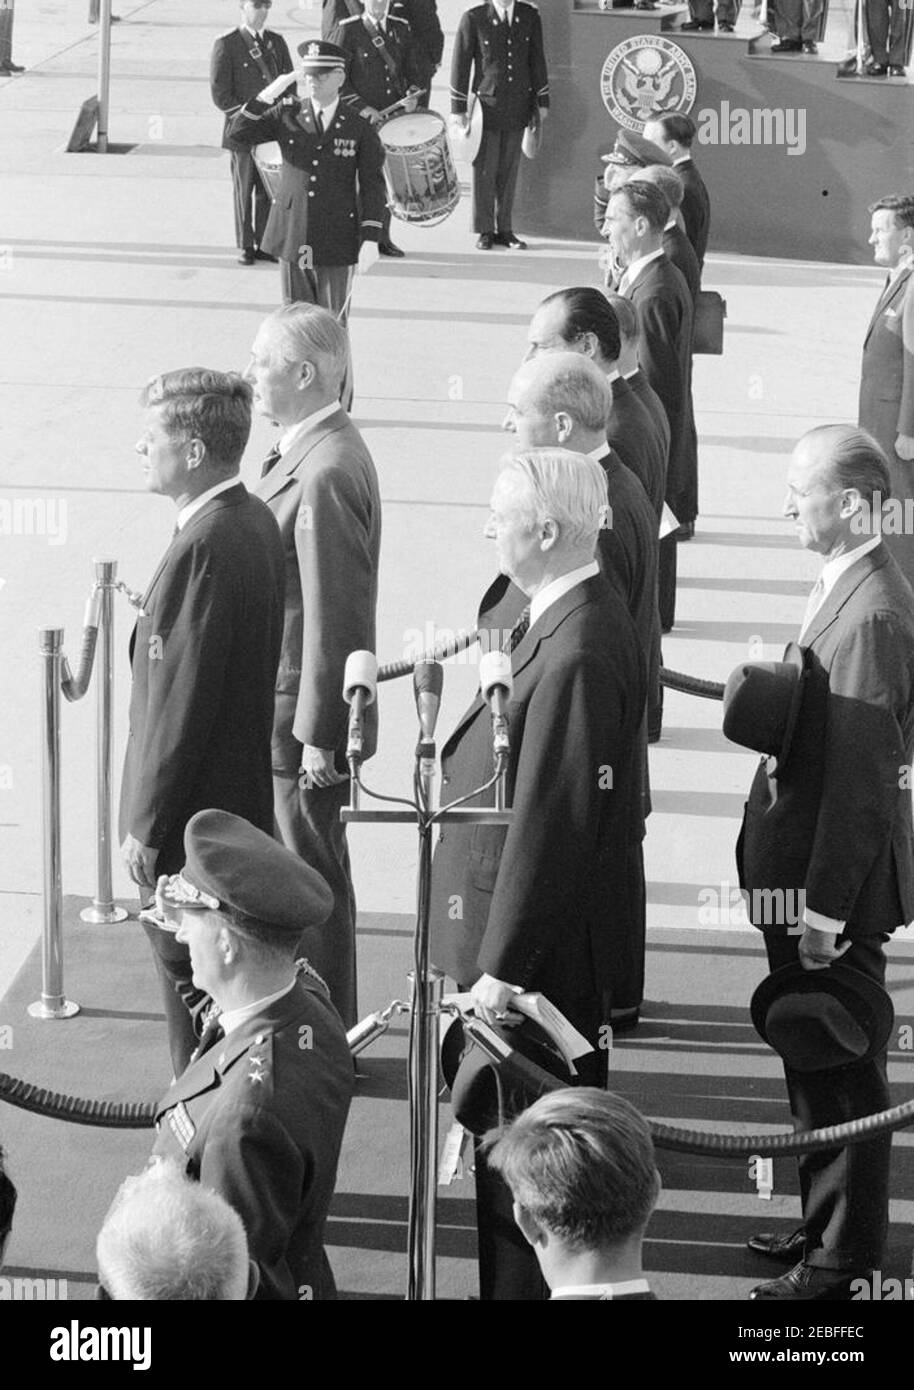 Arrival ceremonies for Harold Macmillan, Prime Minister of Great Britain, 4:50PM. Arrival ceremonies in honor of Prime Minister of Great Britain, Harold Macmillan. Standing on the reviewing platform (L-R): President John F. Kennedy; Prime Minister Macmillan; United States Ambassador to Great Britain, David K. E. Bruce; Secretary of State, Dean Rusk; Ambassador of Great Britain, Sir David Ormsby-Gore (partially hidden); and Chief of Protocol, Angier Biddle Duke. Standing in group to the right of Ambassador Ormsby-Gore (front to back): Secretary of the PMu2019s Cabinet, Sir Norman Brook (mostly Stock Photo